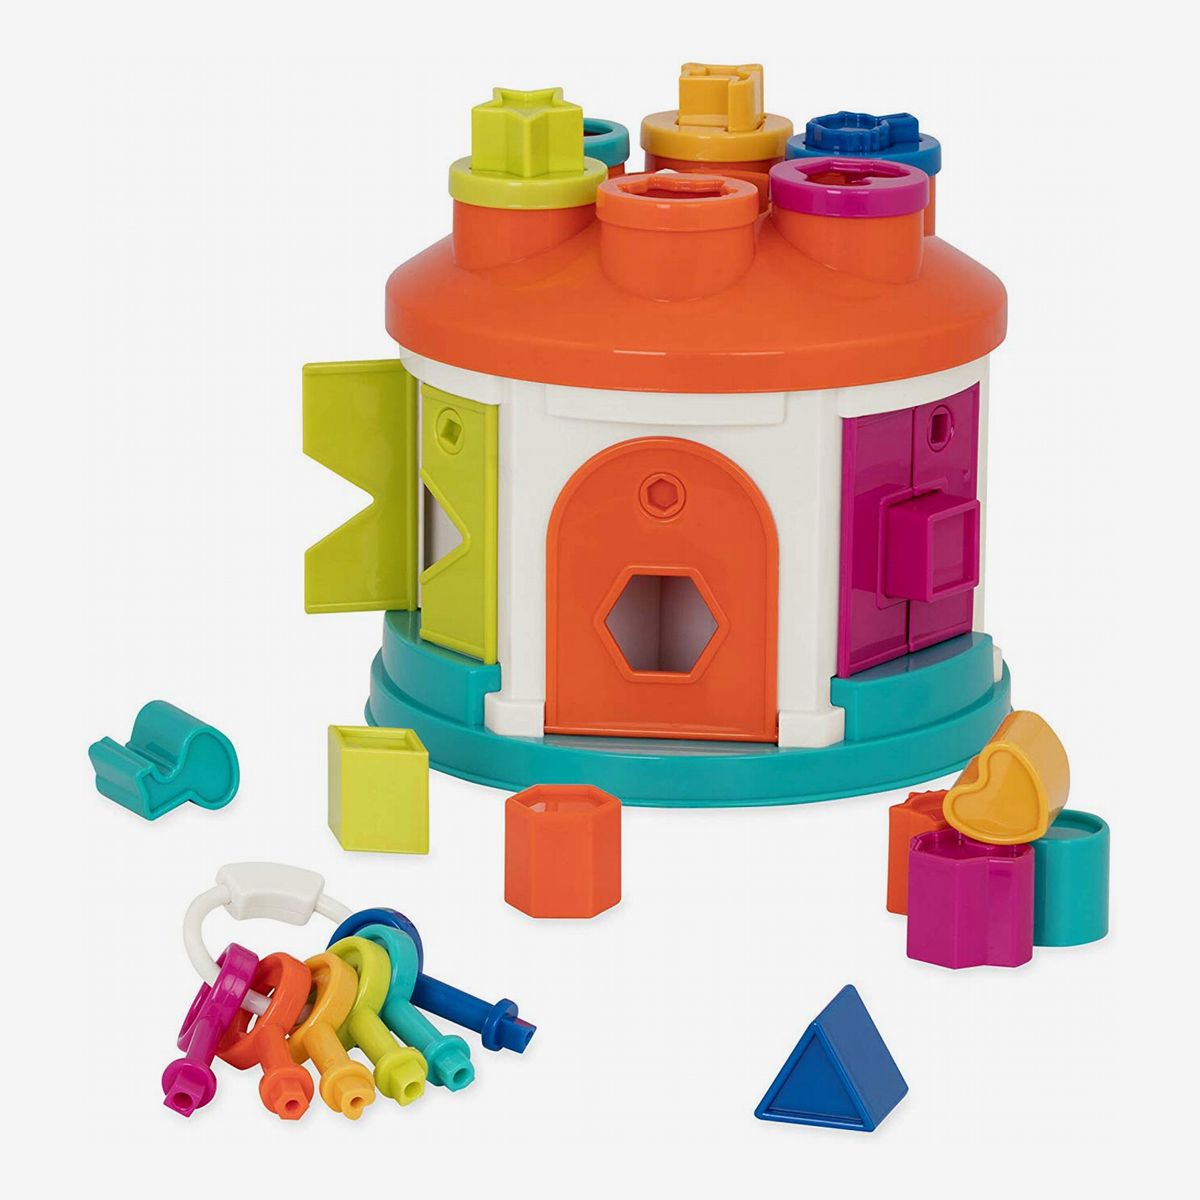 23 Best Toys and Gifts for 2-Year-Olds